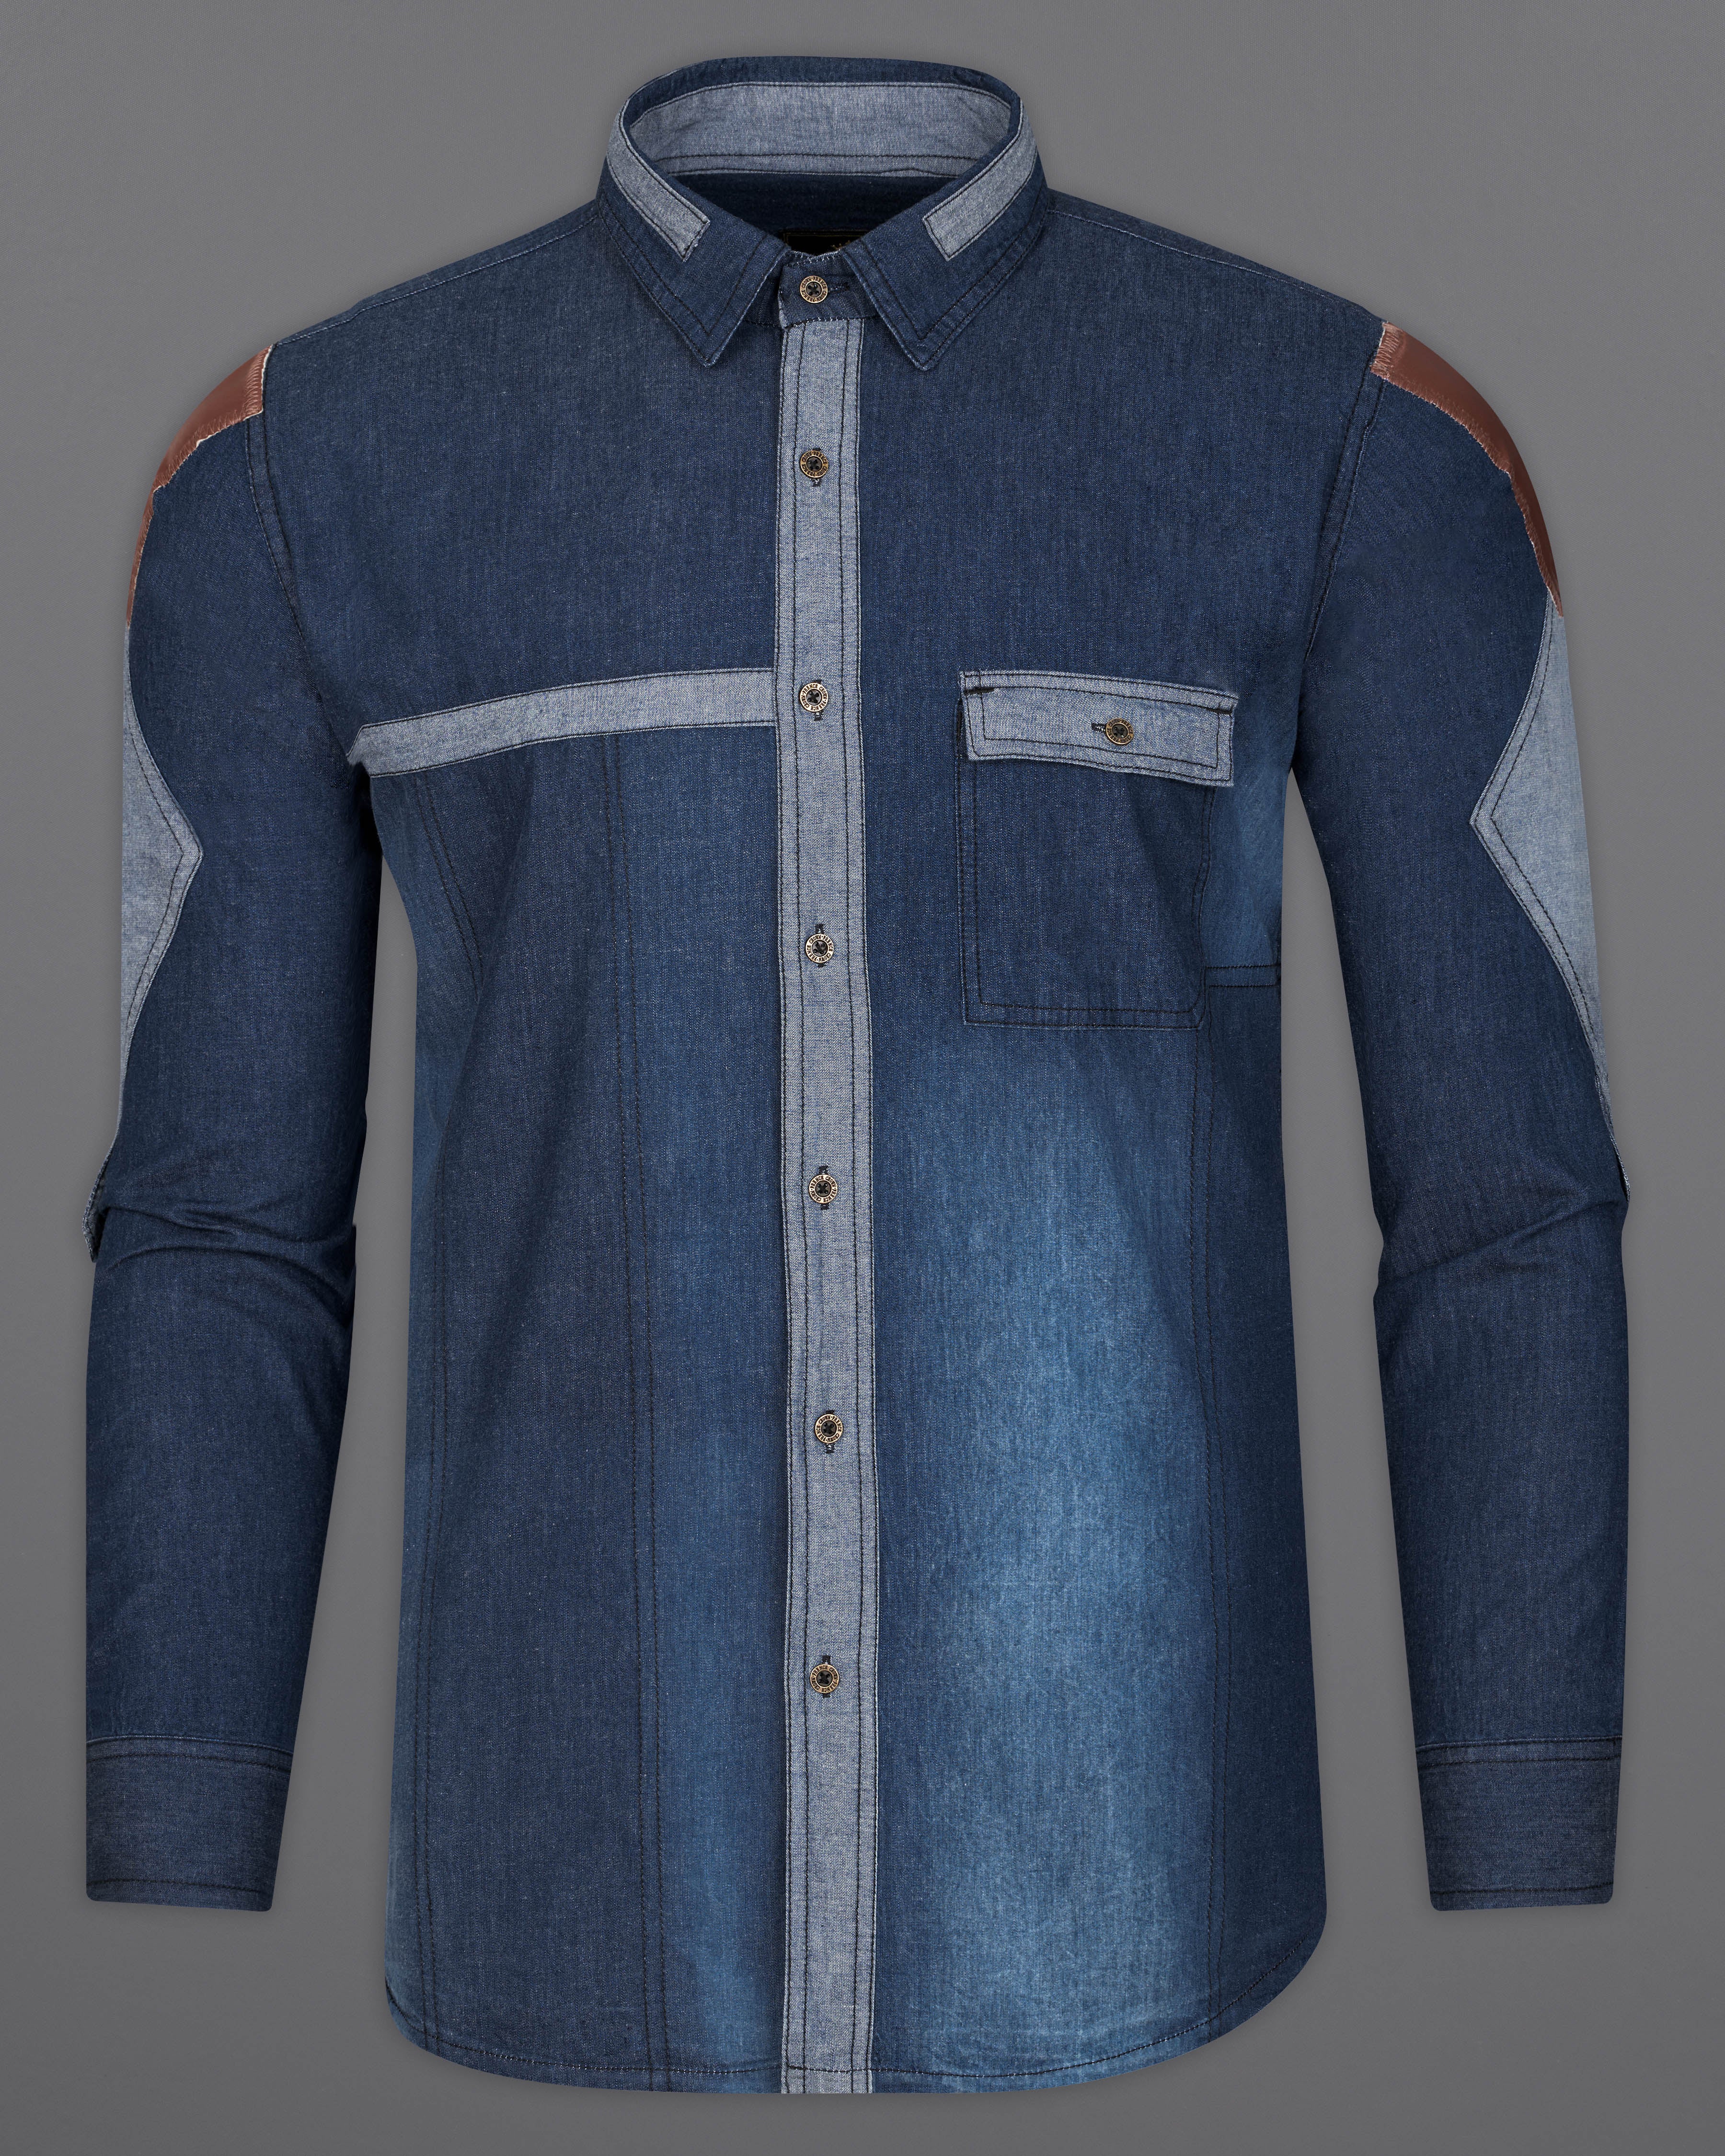 Firefly Blue Chambray Designer Overhirt with Brown Patchwork 9468-MB-38, 9468-MB-H-38, 9468-MB-39, 9468-MB-H-39, 9468-MB-40, 9468-MB-H-40, 9468-MB-42, 9468-MB-H-42, 9468-MB-44, 9468-MB-H-44, 9468-MB-46, 9468-MB-H-46, 9468-MB-48, 9468-MB-H-48, 9468-MB-50, 9468-MB-H-50, 9468-MB-52, 9468-MB-H-52